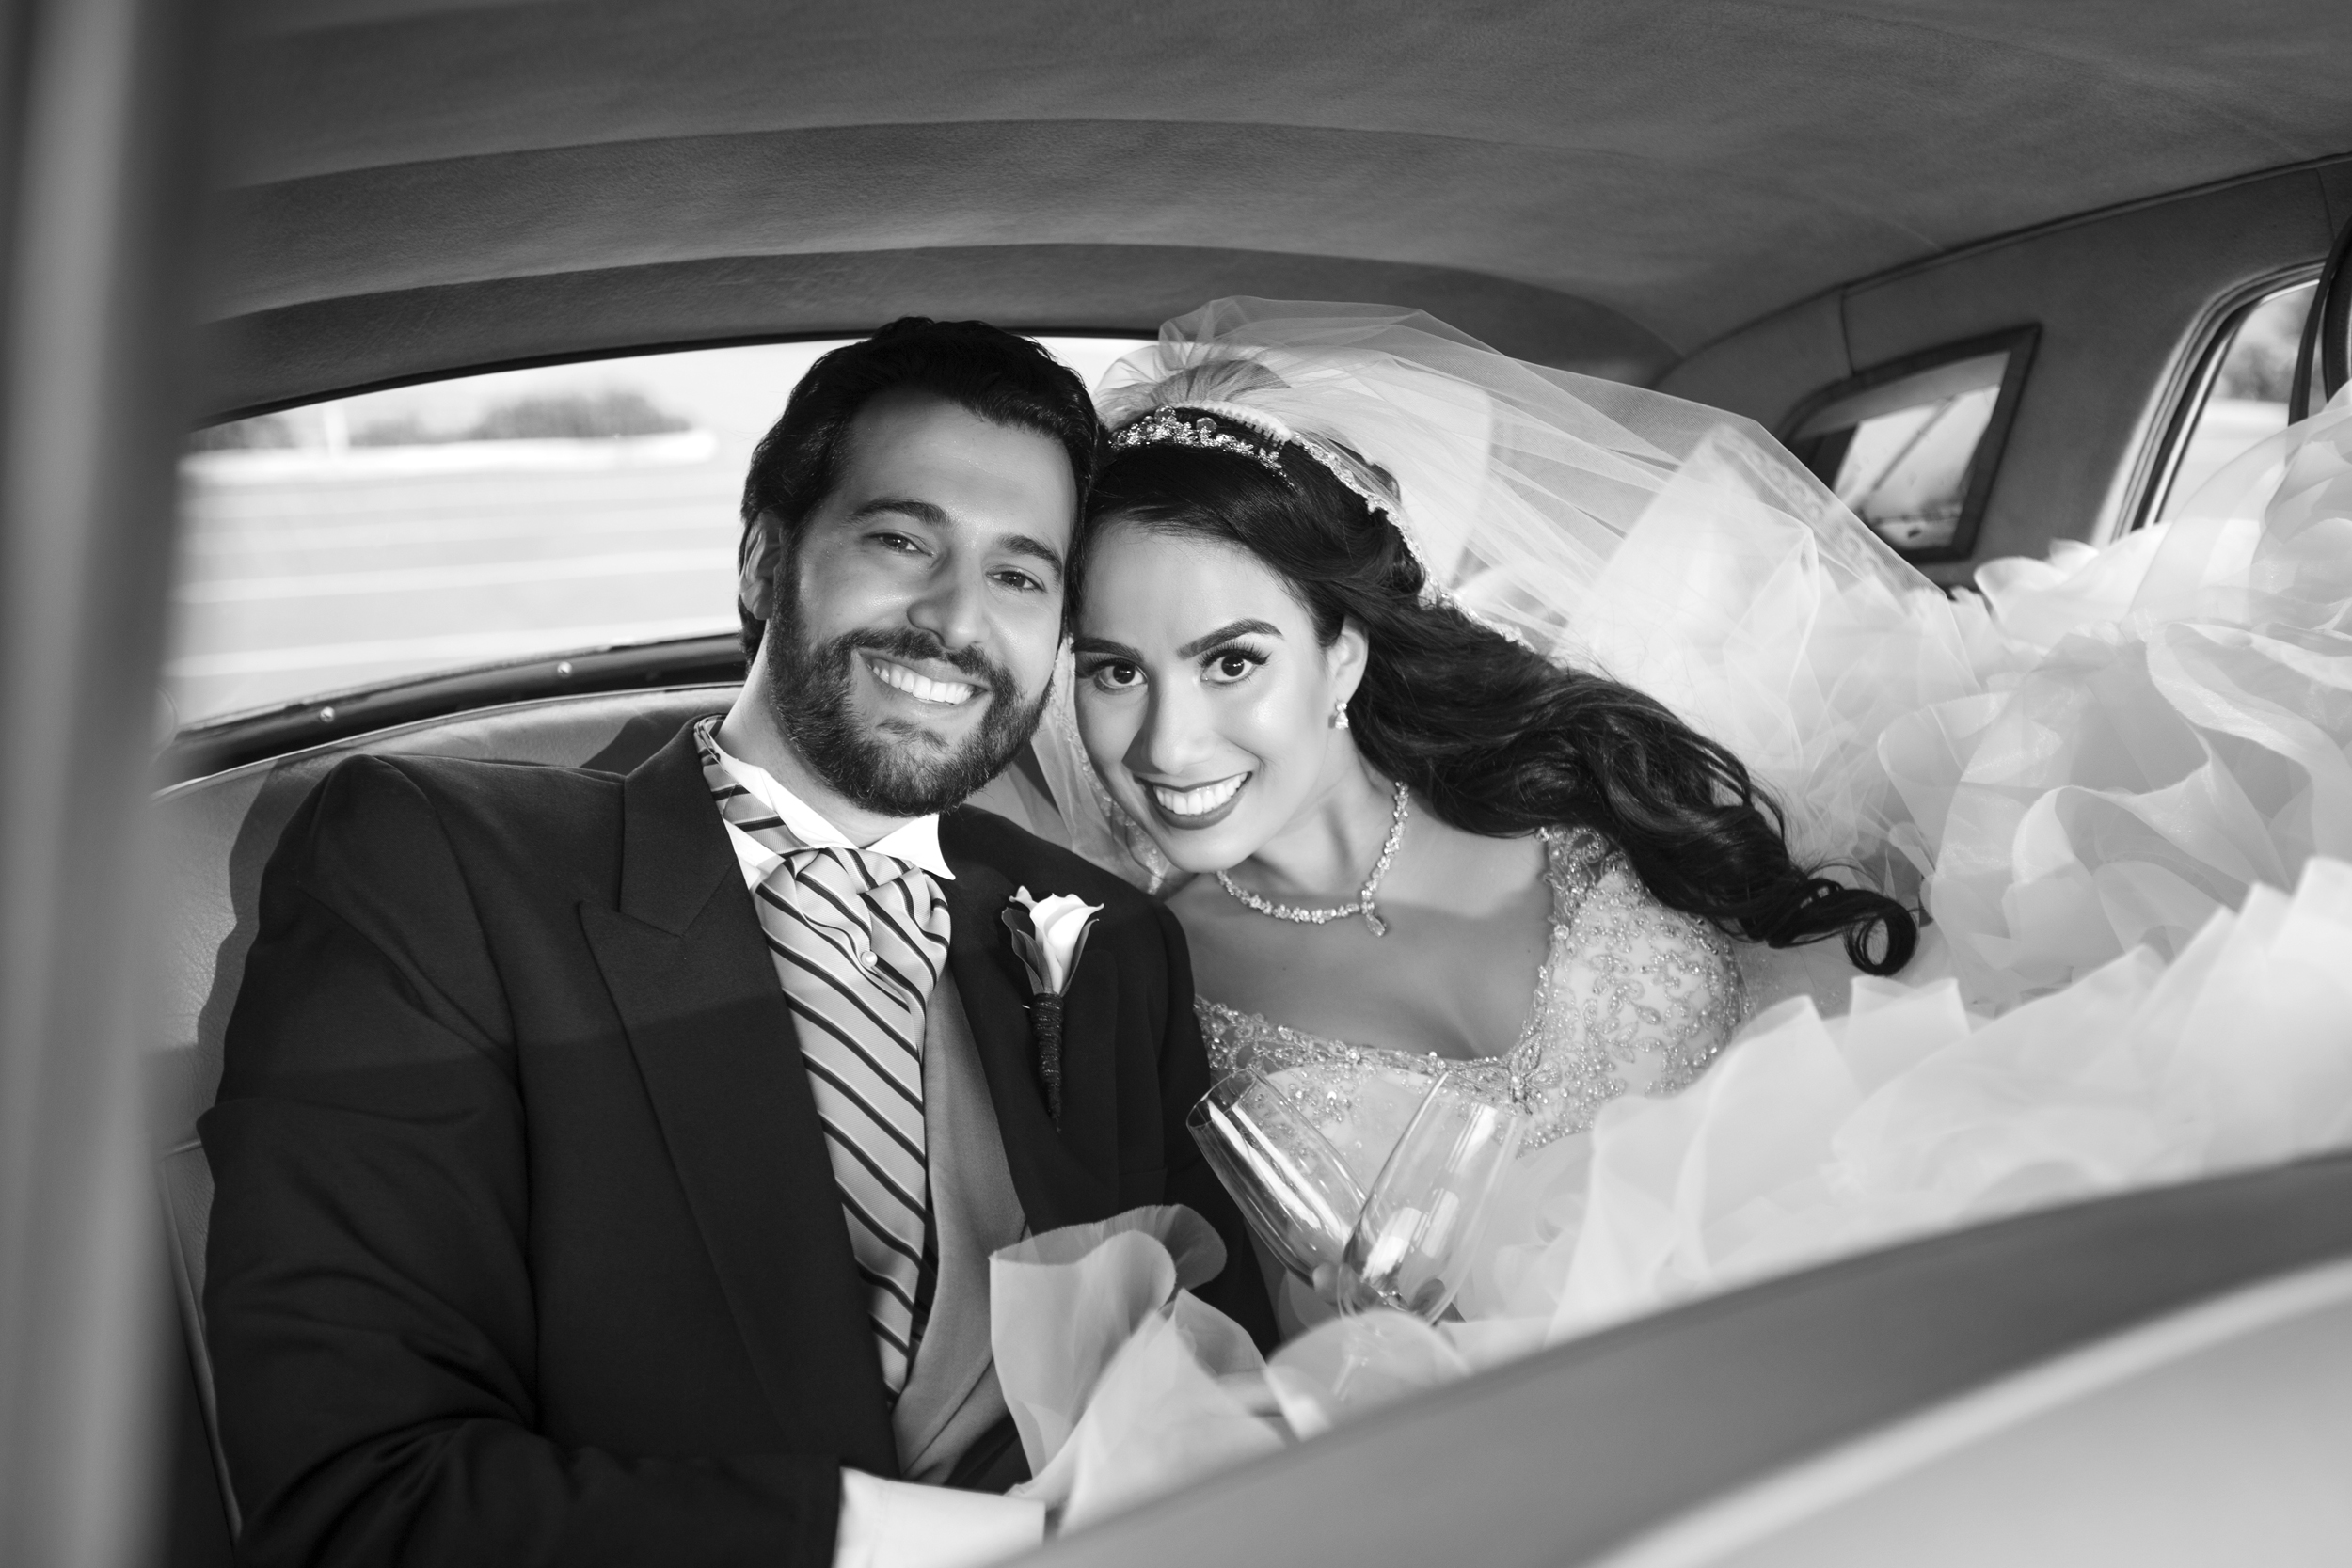 Just Married! A black and white portrait of the happy couple